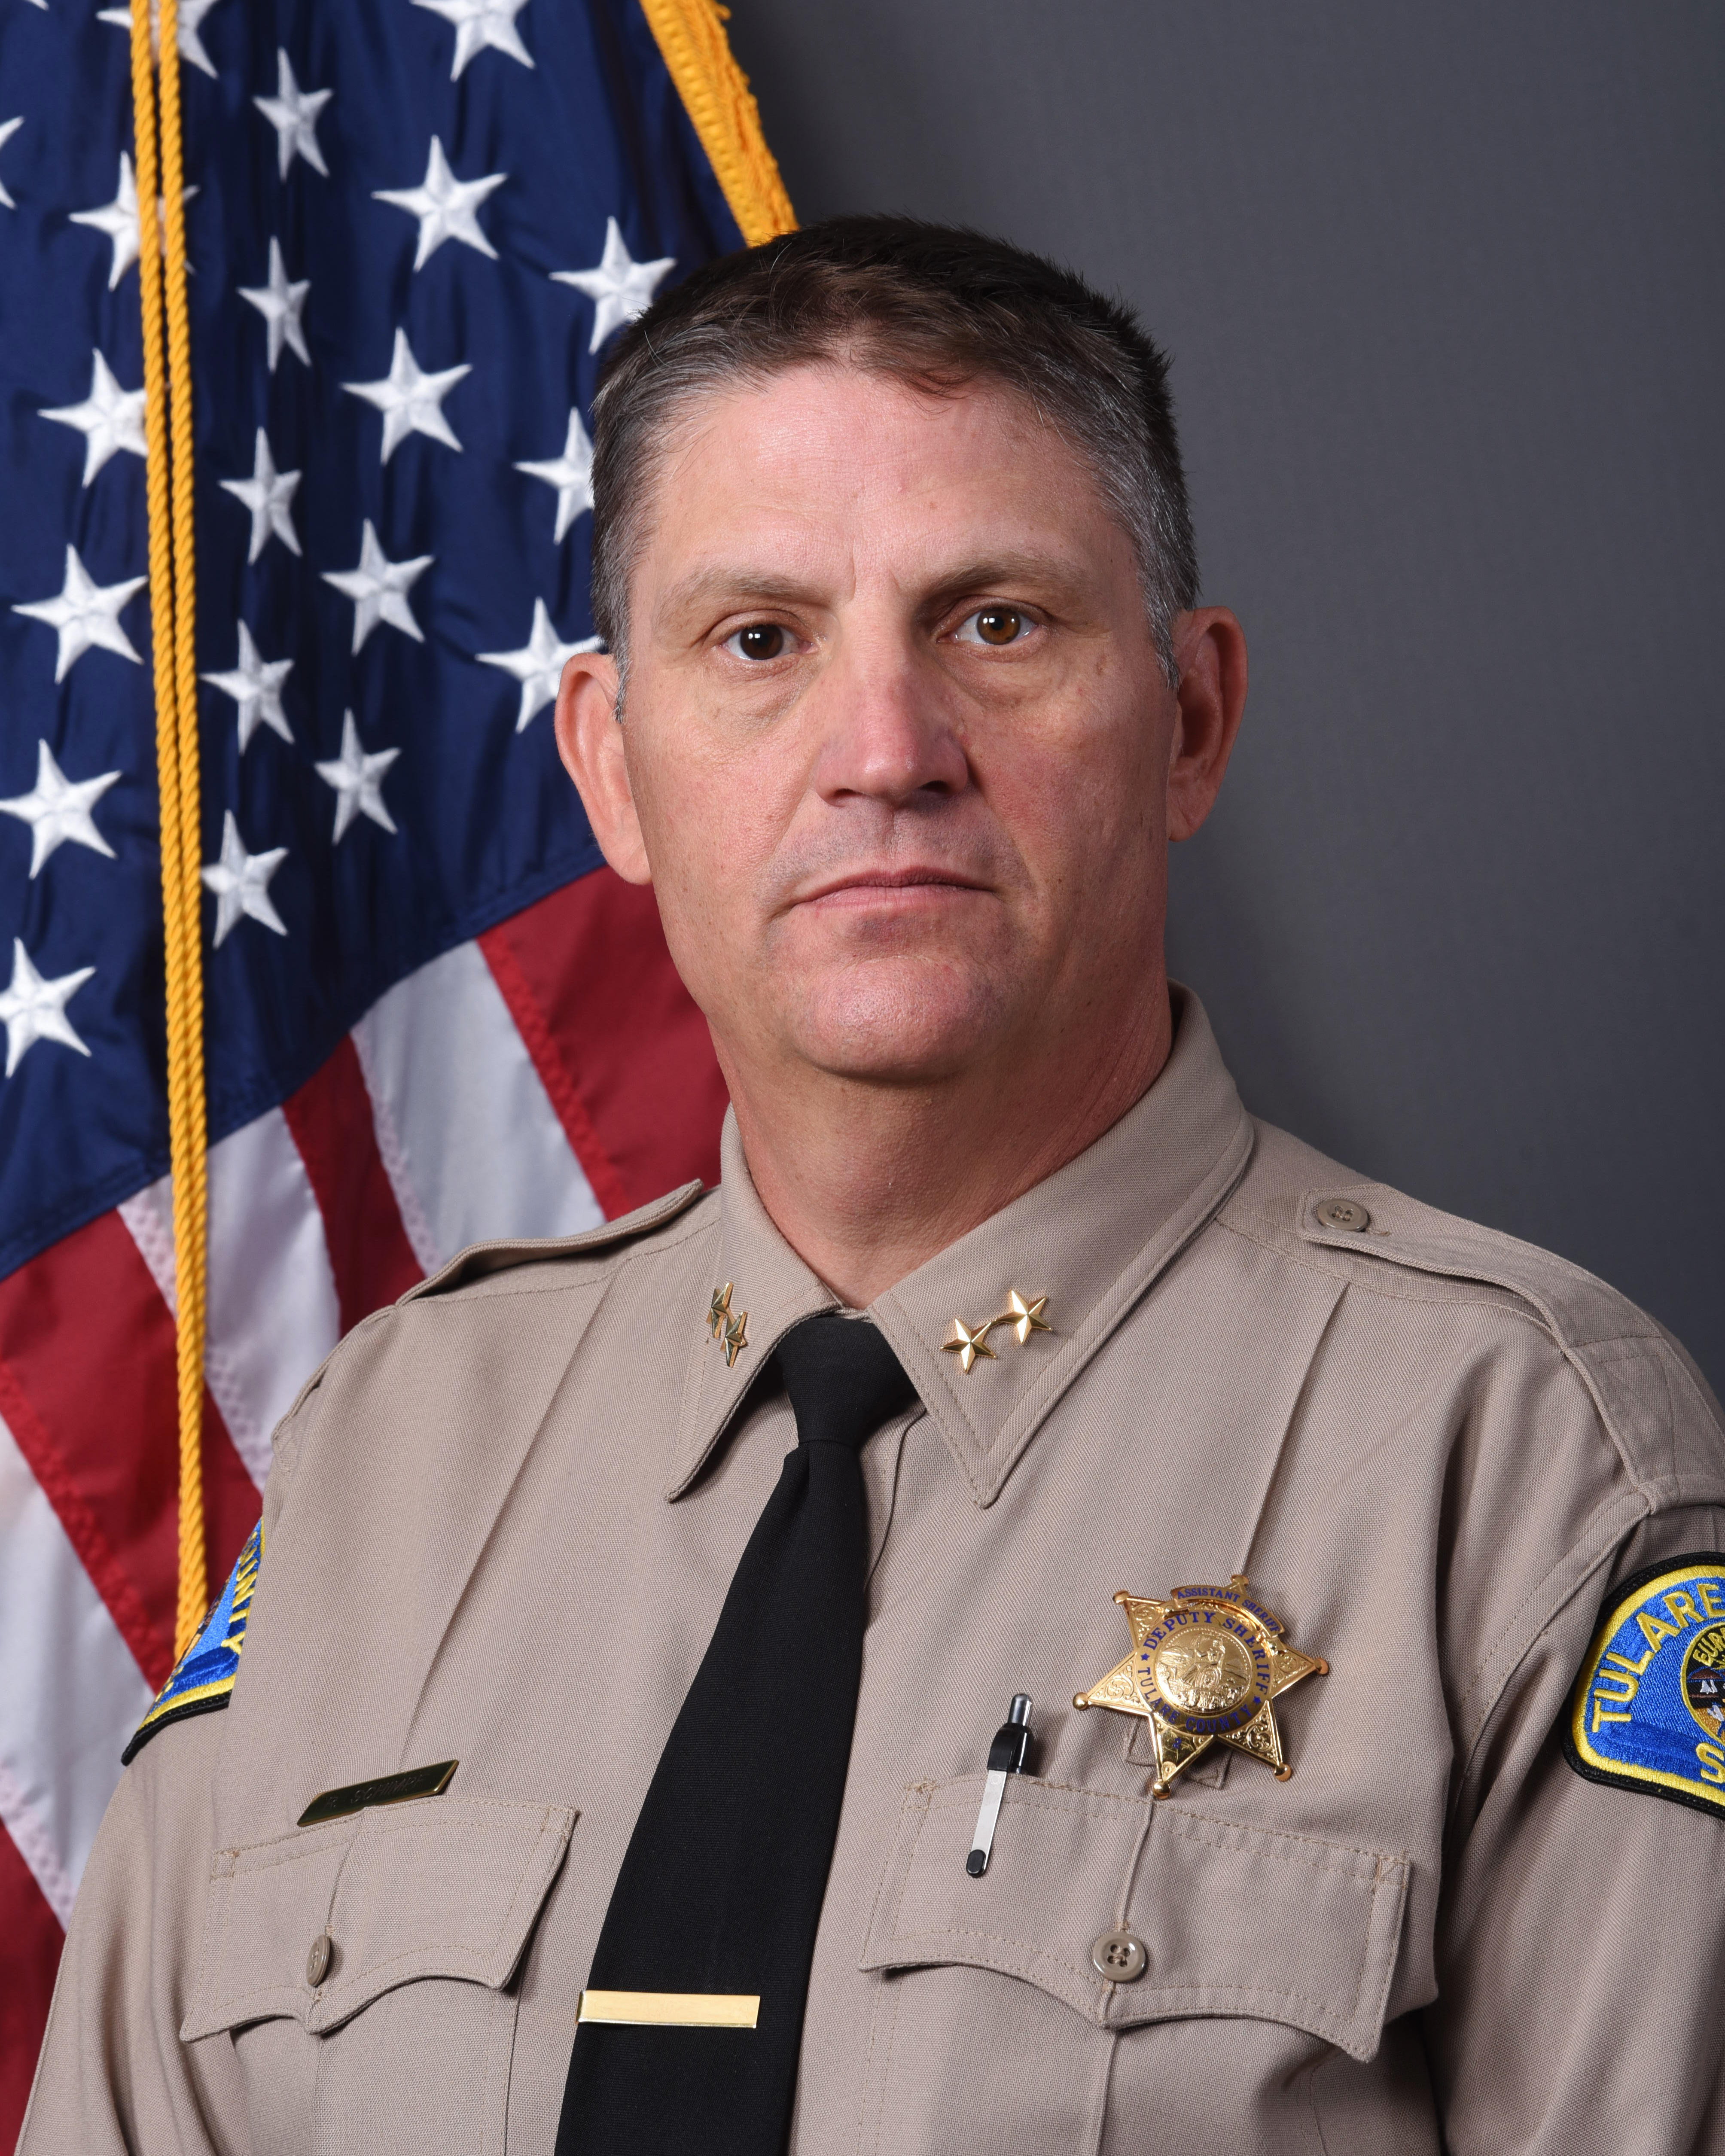 A head and shoulders portrait of Assistant Sheriff Robert Schimpf in uniform in front of the American Flag.